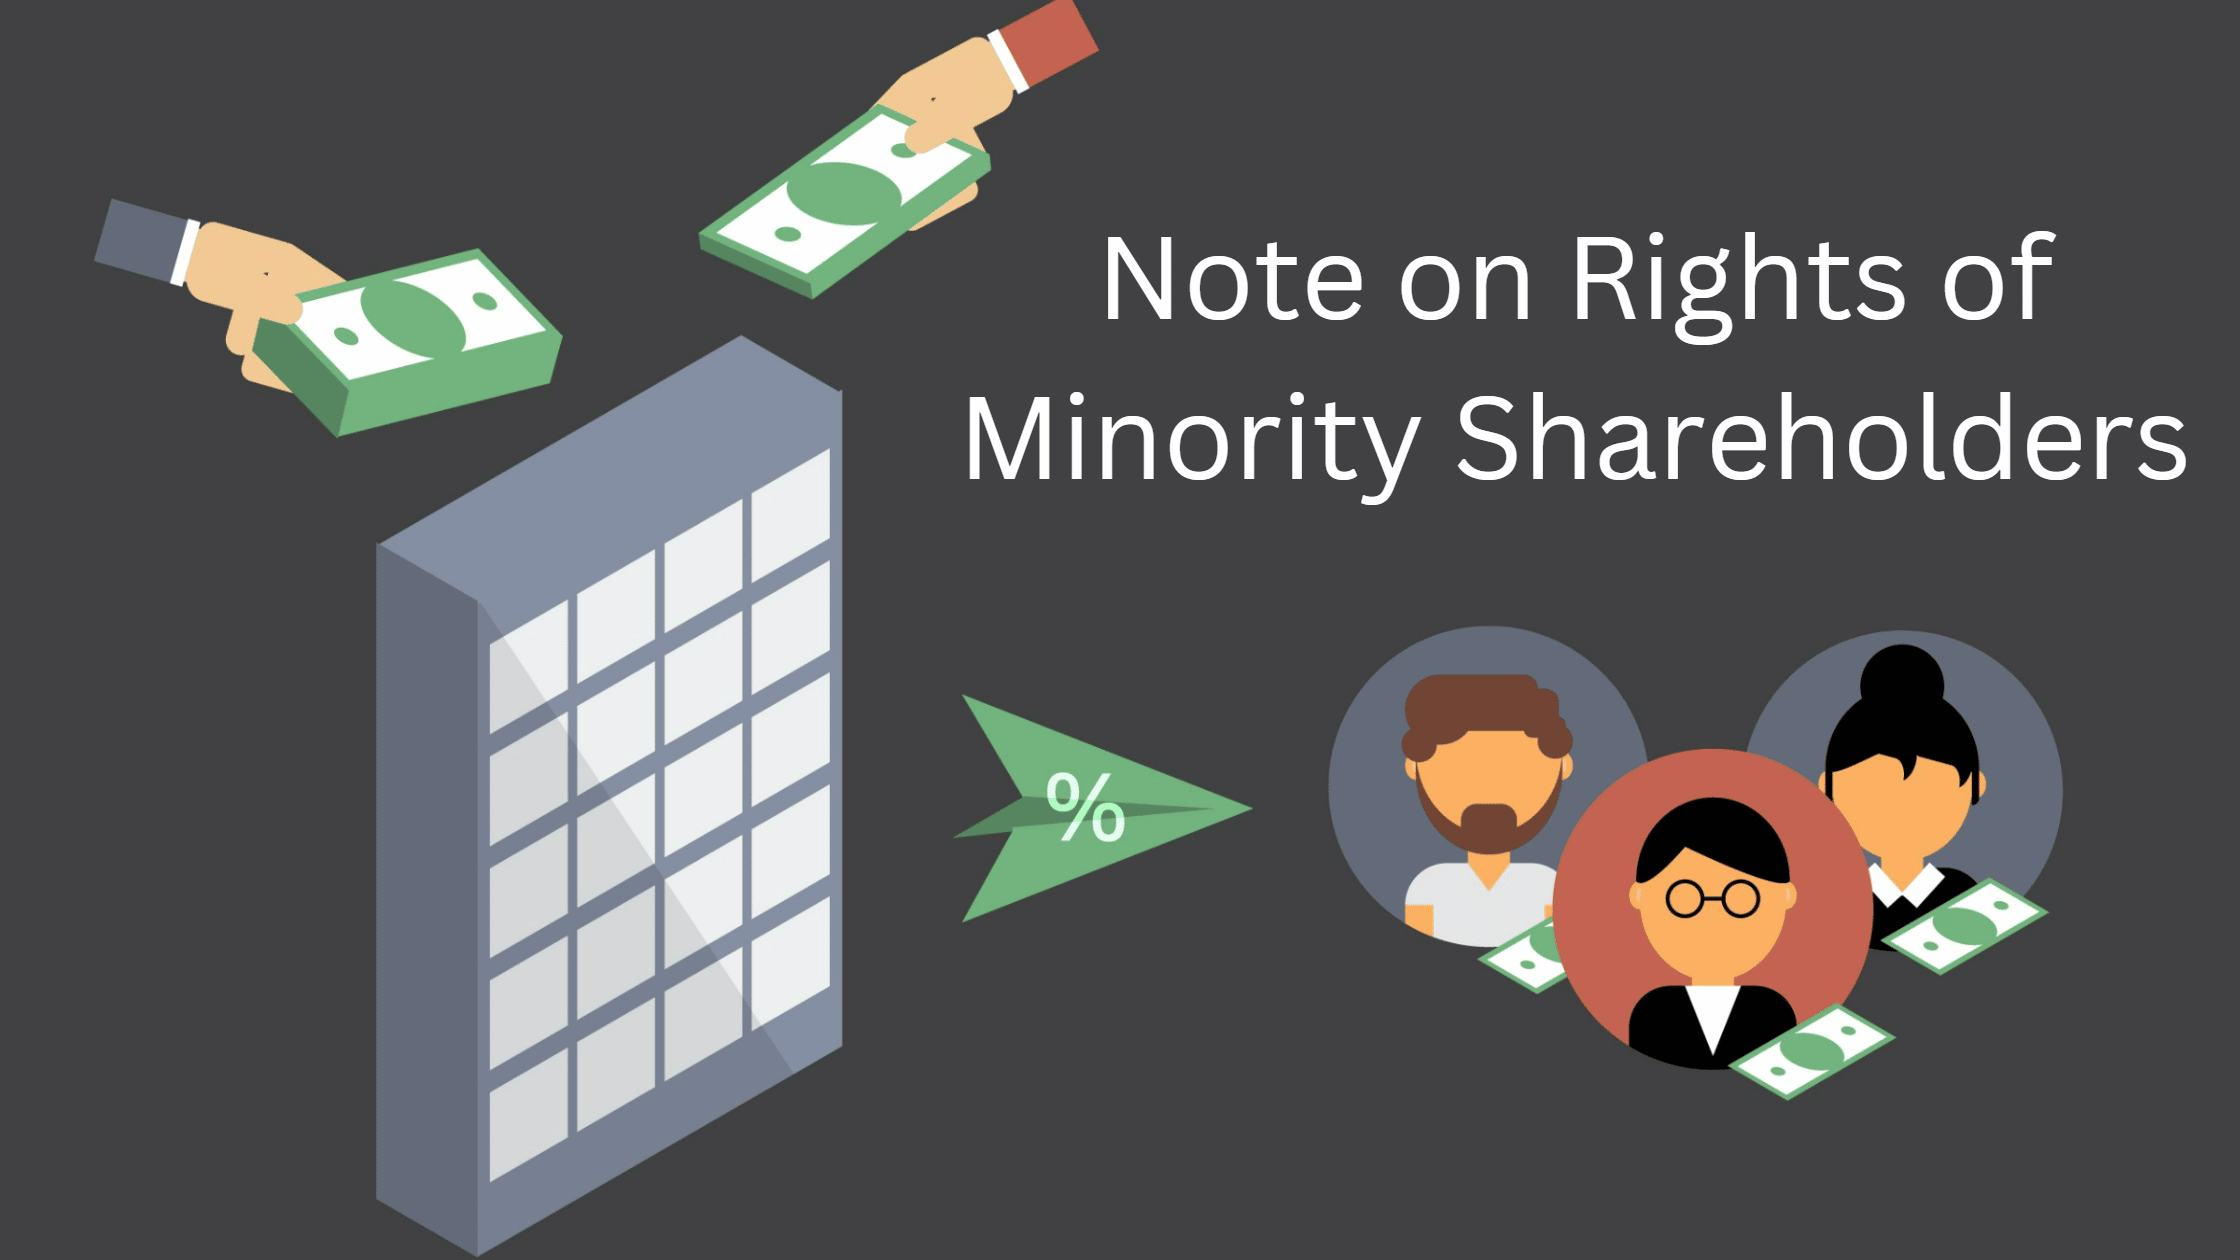 Note on Rights of Minority Shareholders